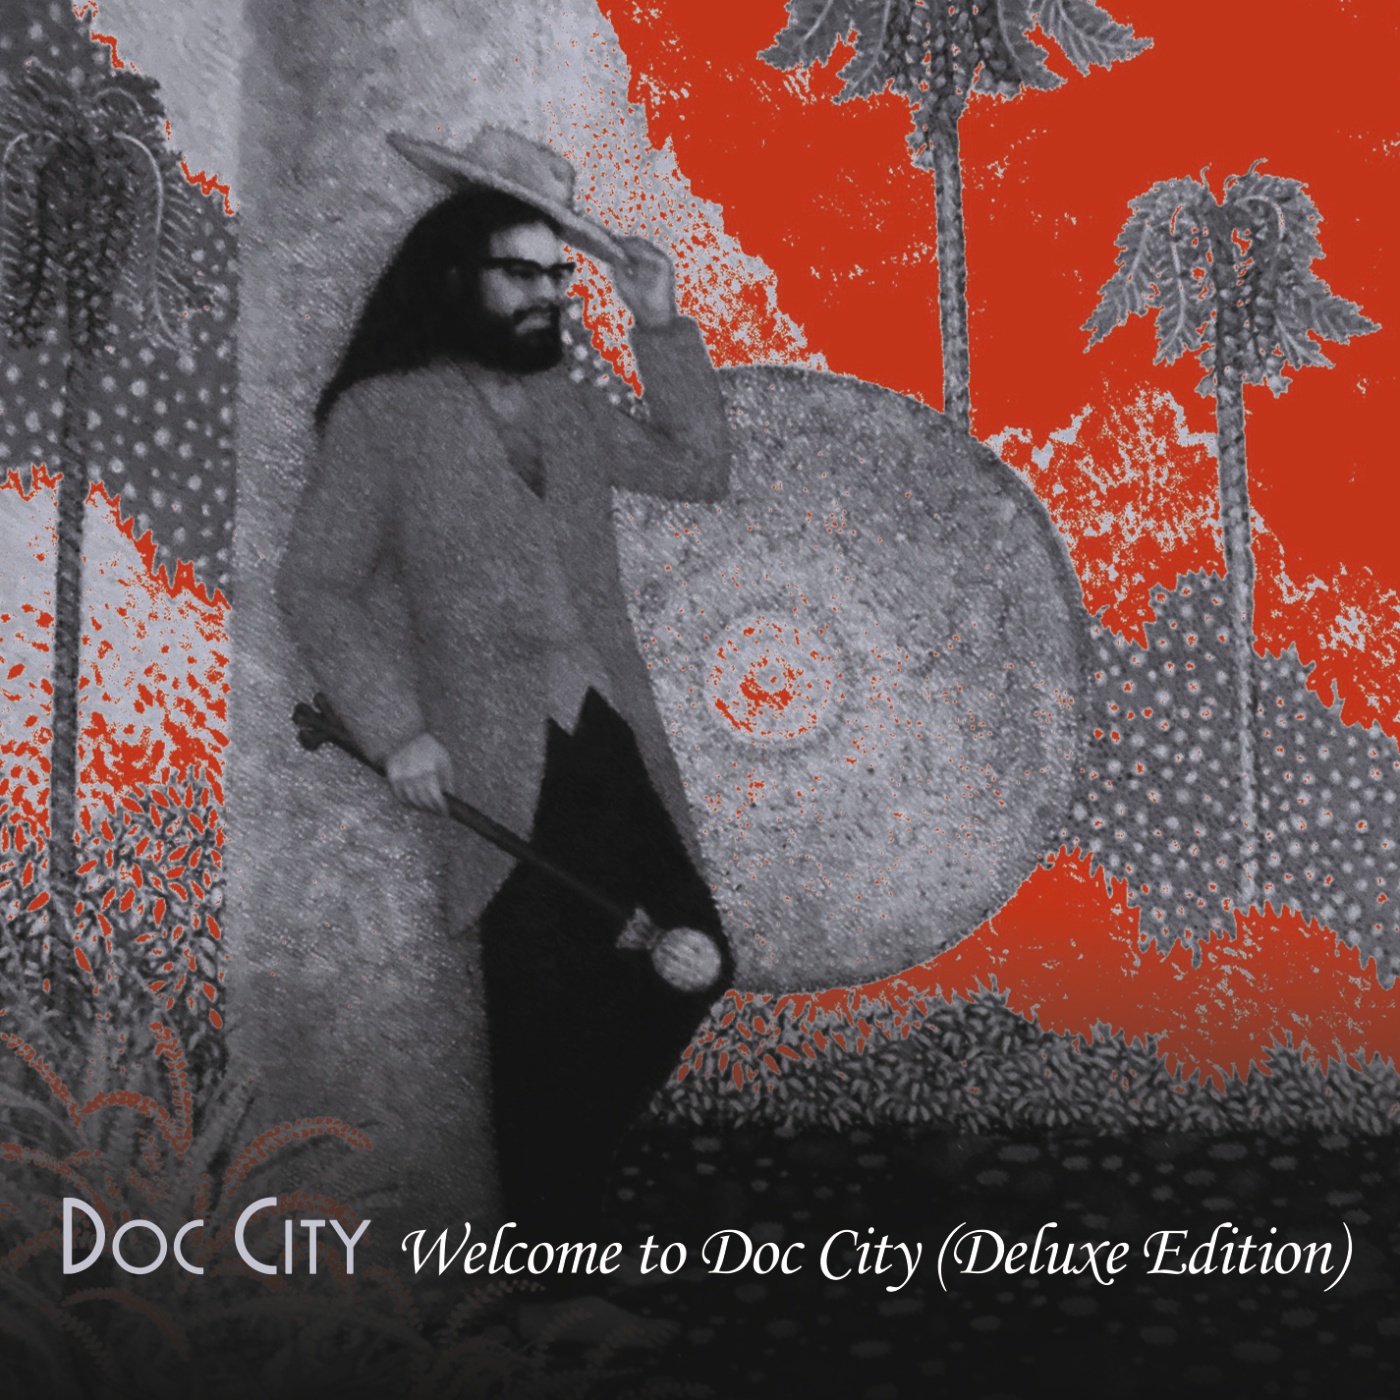 Doc City - 'Welcome to Doc City (Deluxe Edition)' Review | Opinions | LIVING LIFE FEARLESS